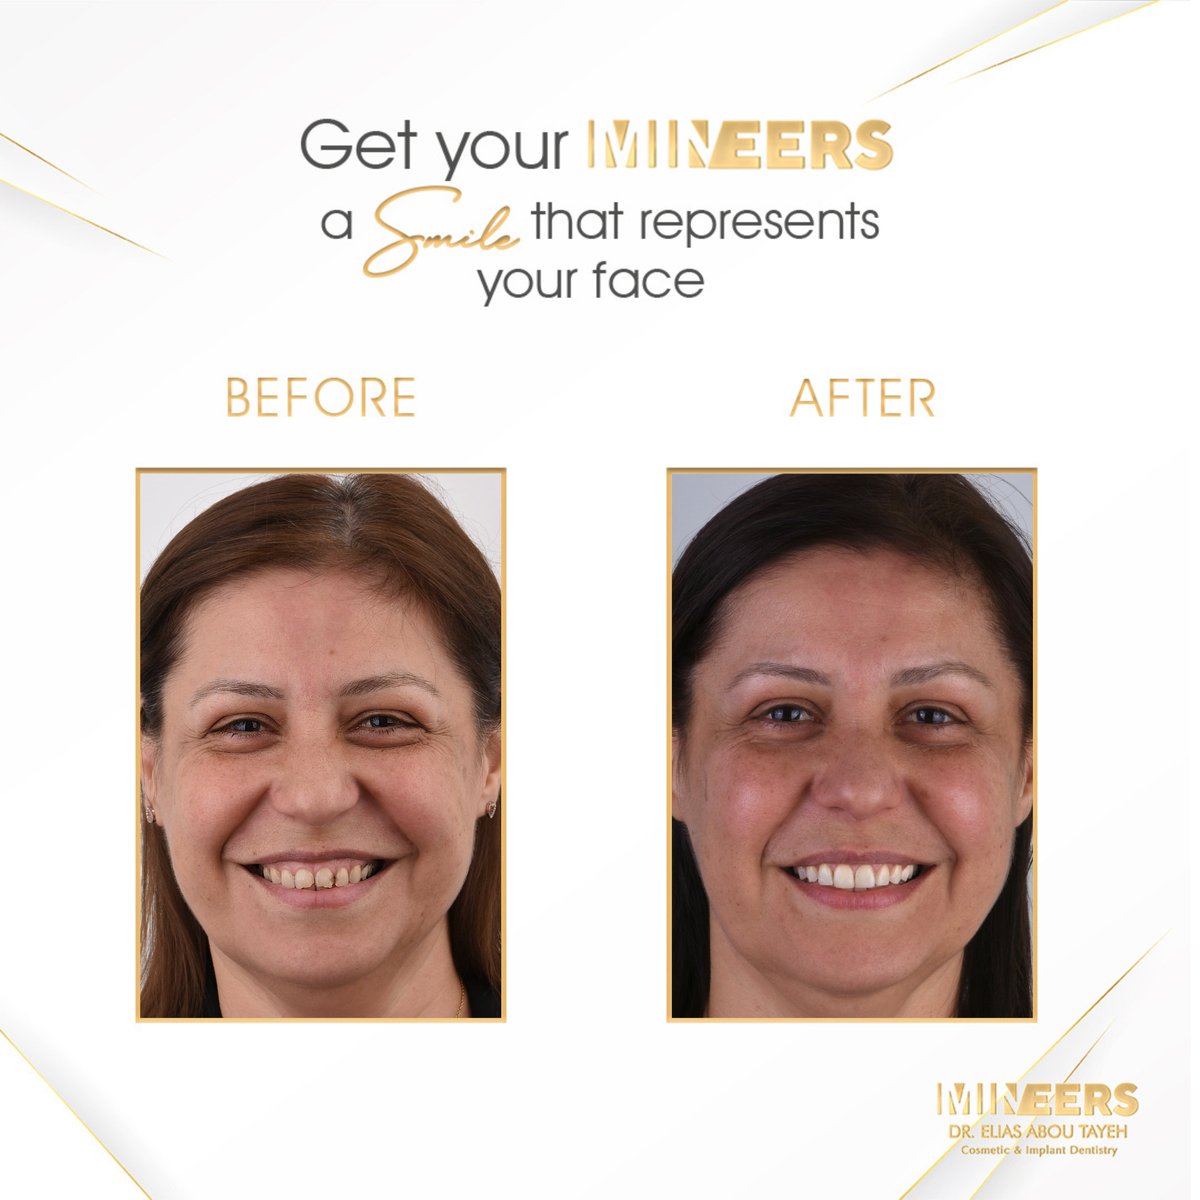 From Decay to Dazzling: A Stunning Veneer Transformation

Book Your Appointment Now:

🇱🇧 : +961 3 757 127
#Mineers #CompositeVeneers #DentalTransformation #PerfectSmile #CosmeticDentistry #TeethGoals #ConfidentSmile #DentalVeneers #Dentist #Lebanon #dentistnearme #bestdentist